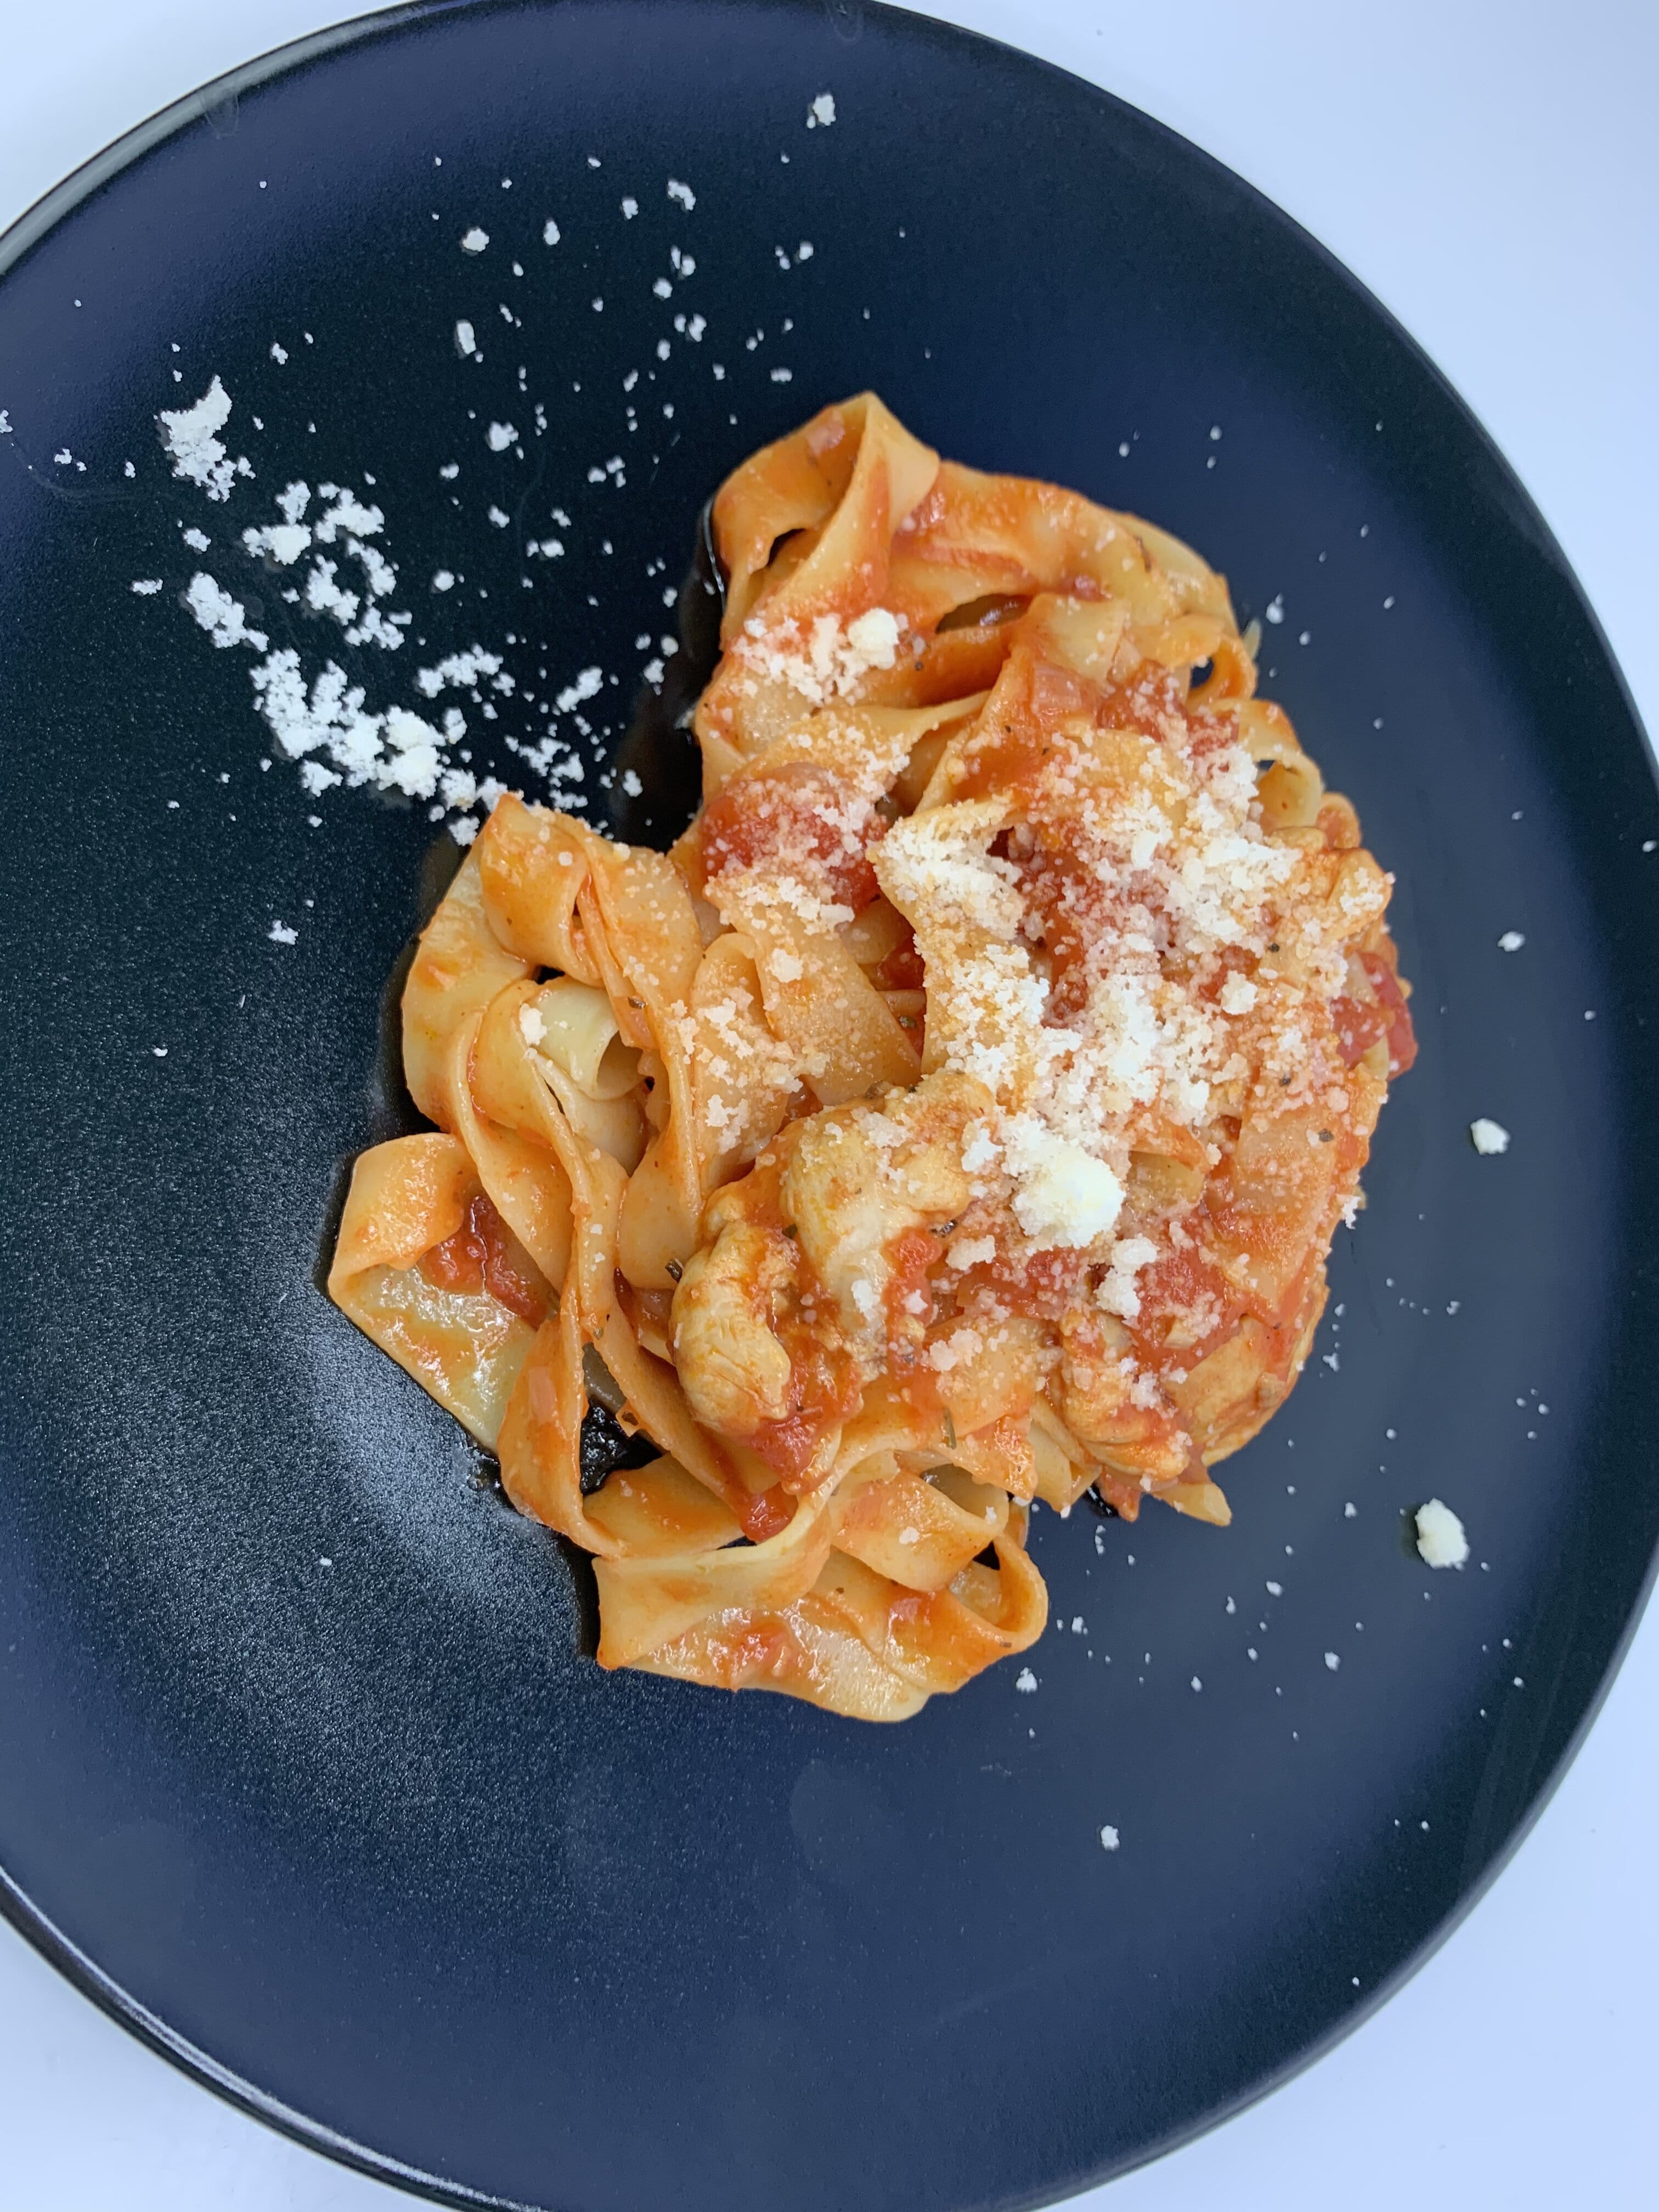 Mind-blowing Chicken Pasta with Tomato Sauce